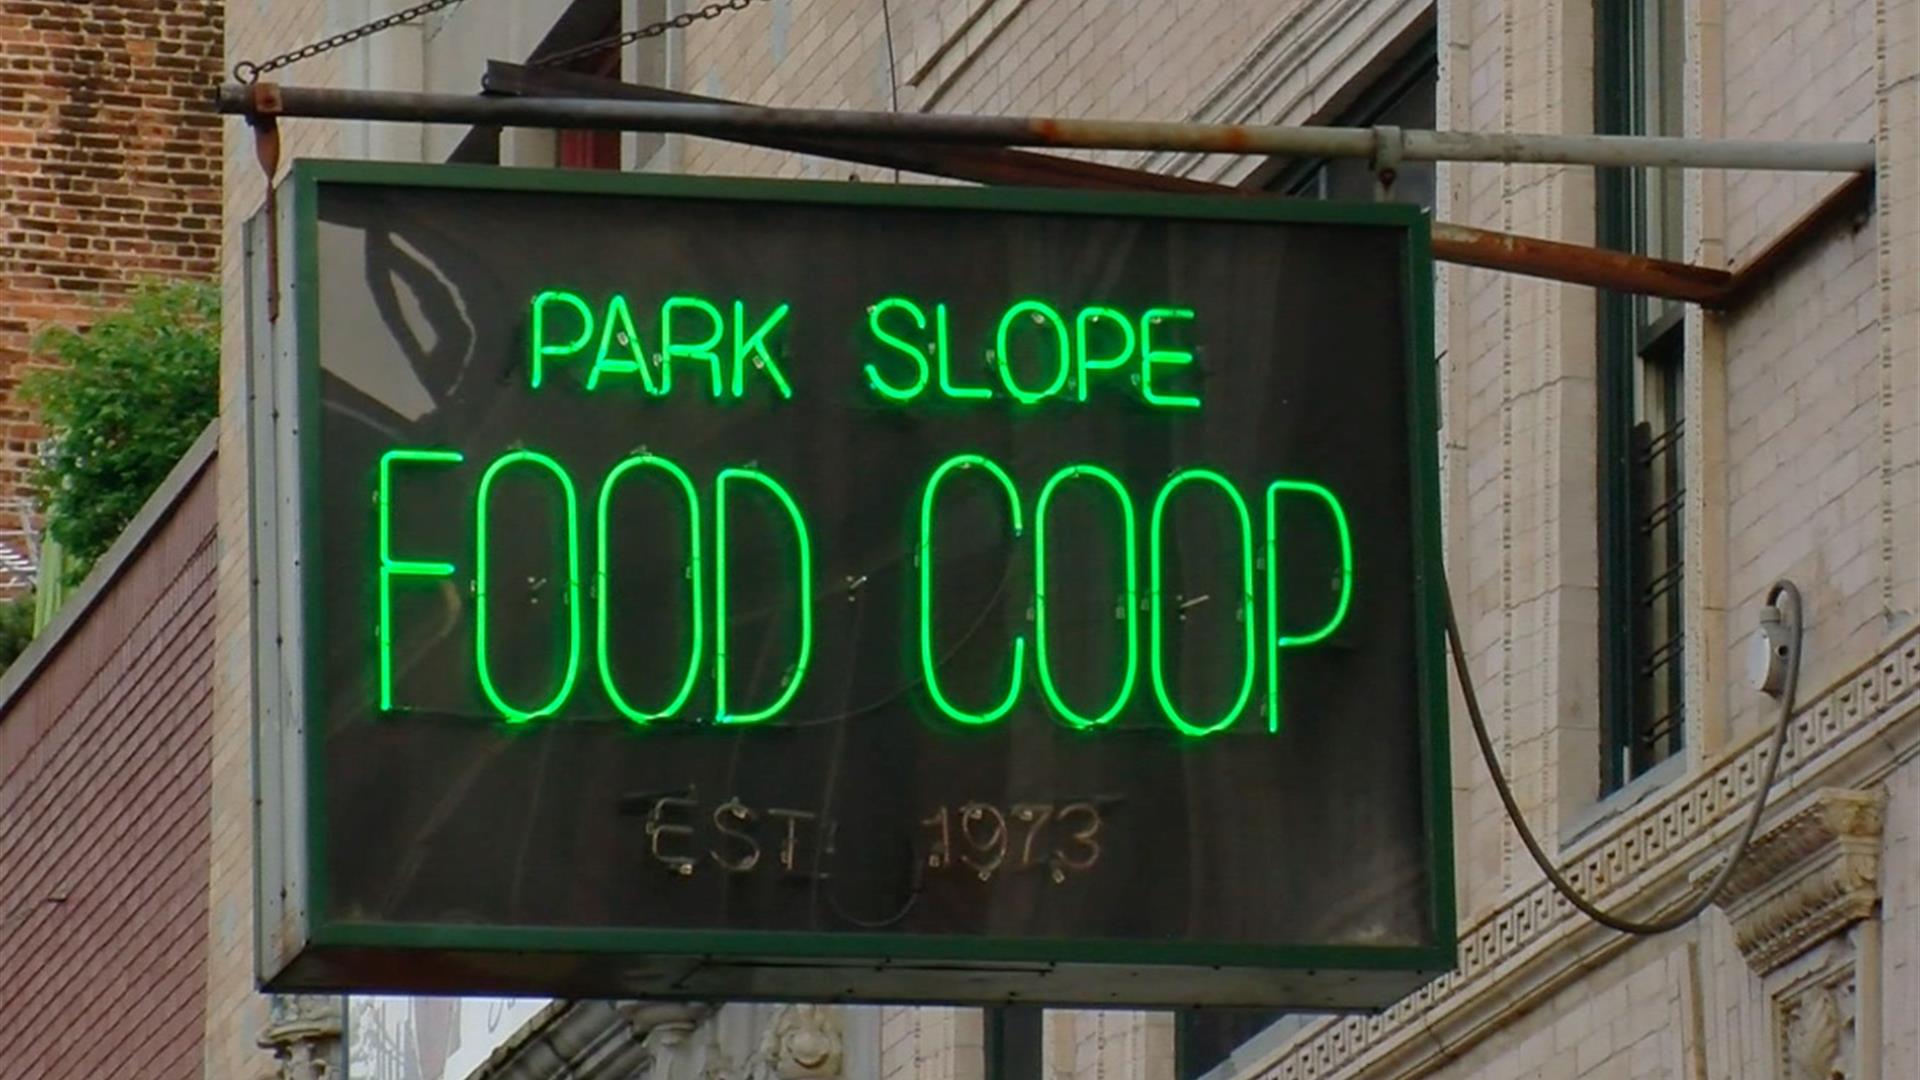 Park Slope Food Coop, una cooperativa solidale a New York (13/07/2015